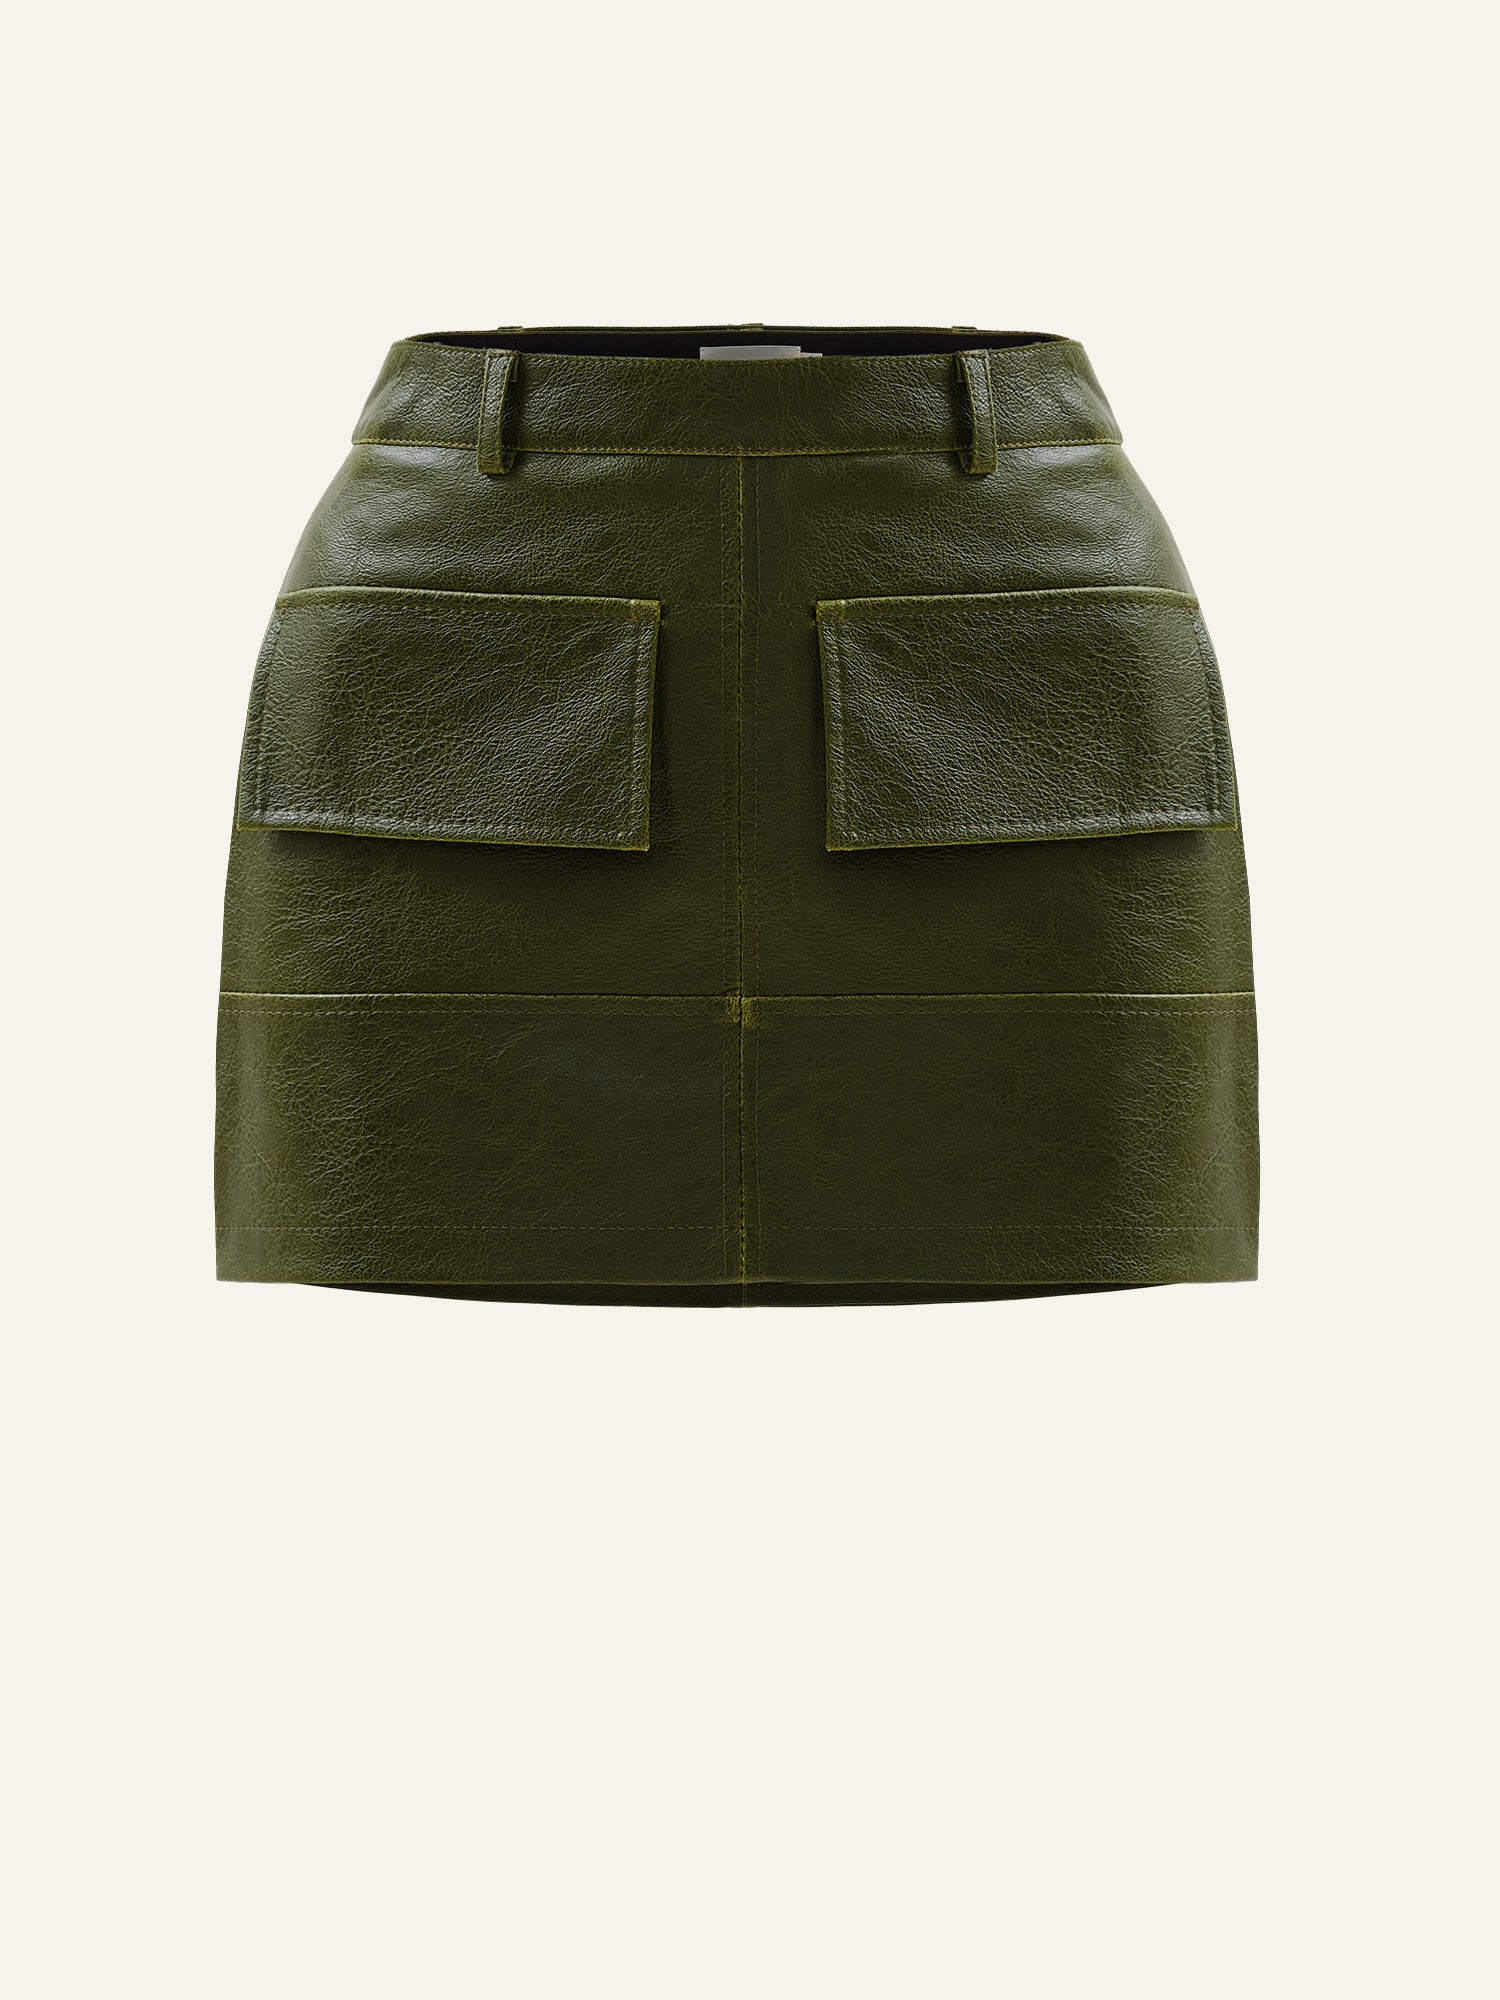 Product photo of a green vegan leather high rise skort with decorative pockets